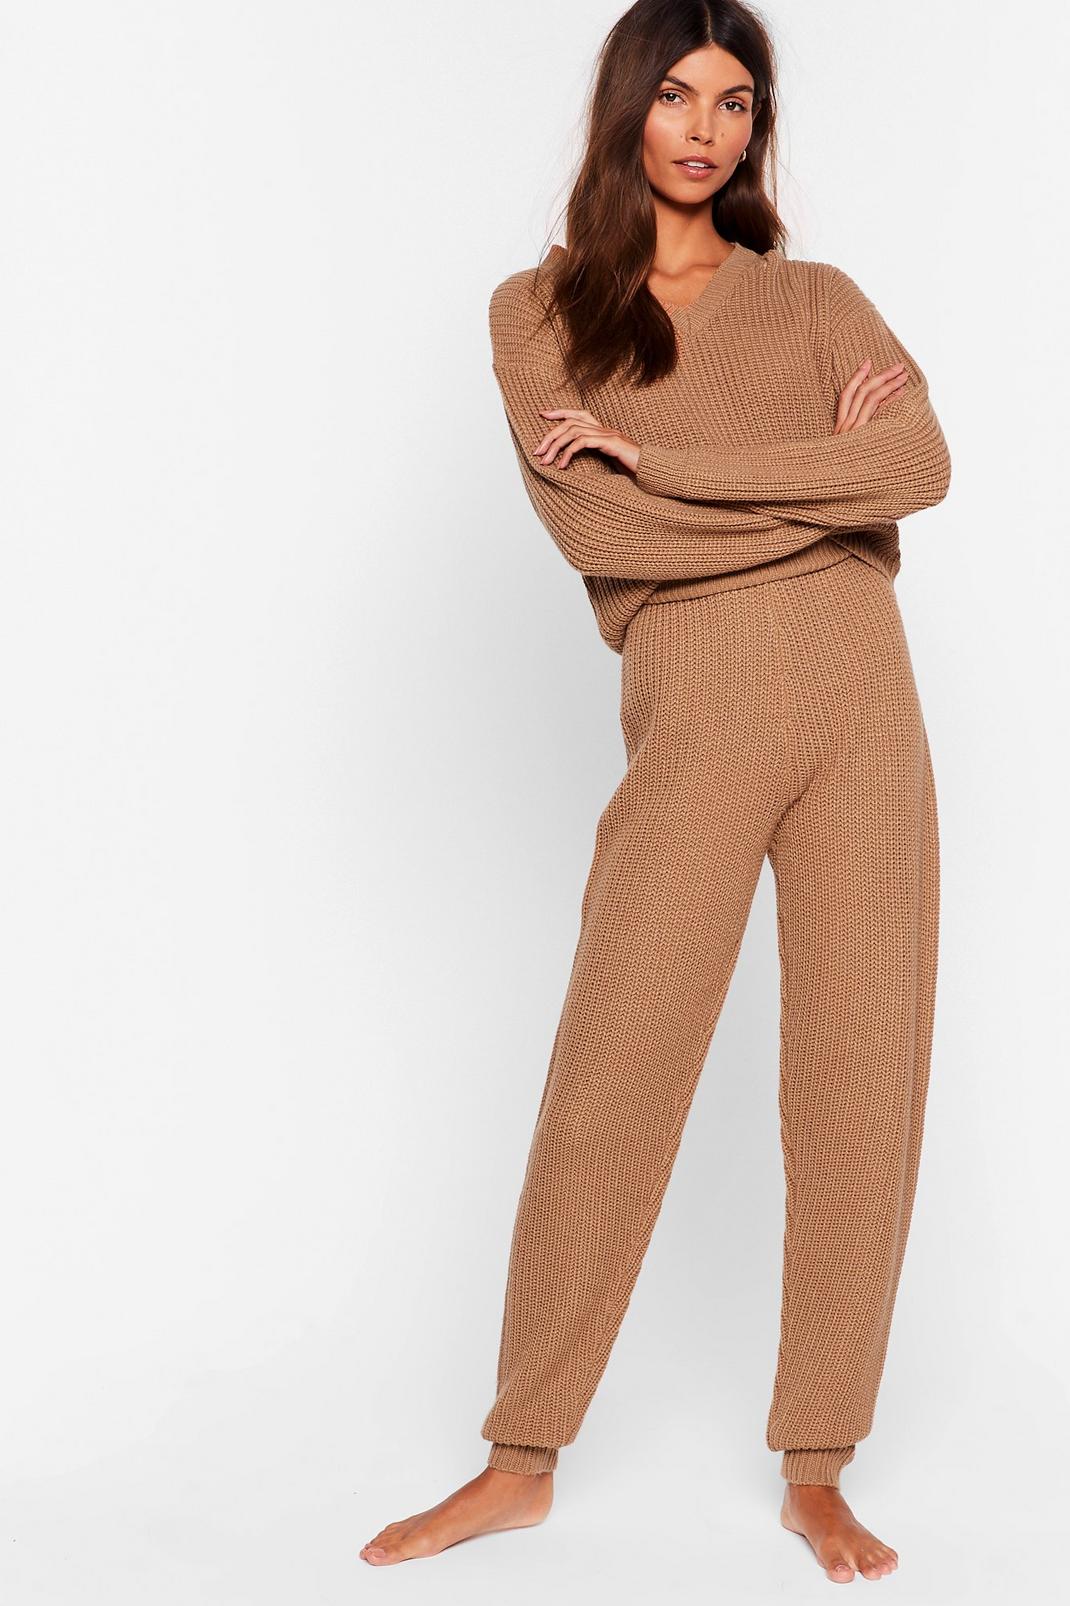 Knit 'Em With the Truth Jogger Lounge Set | Nasty Gal